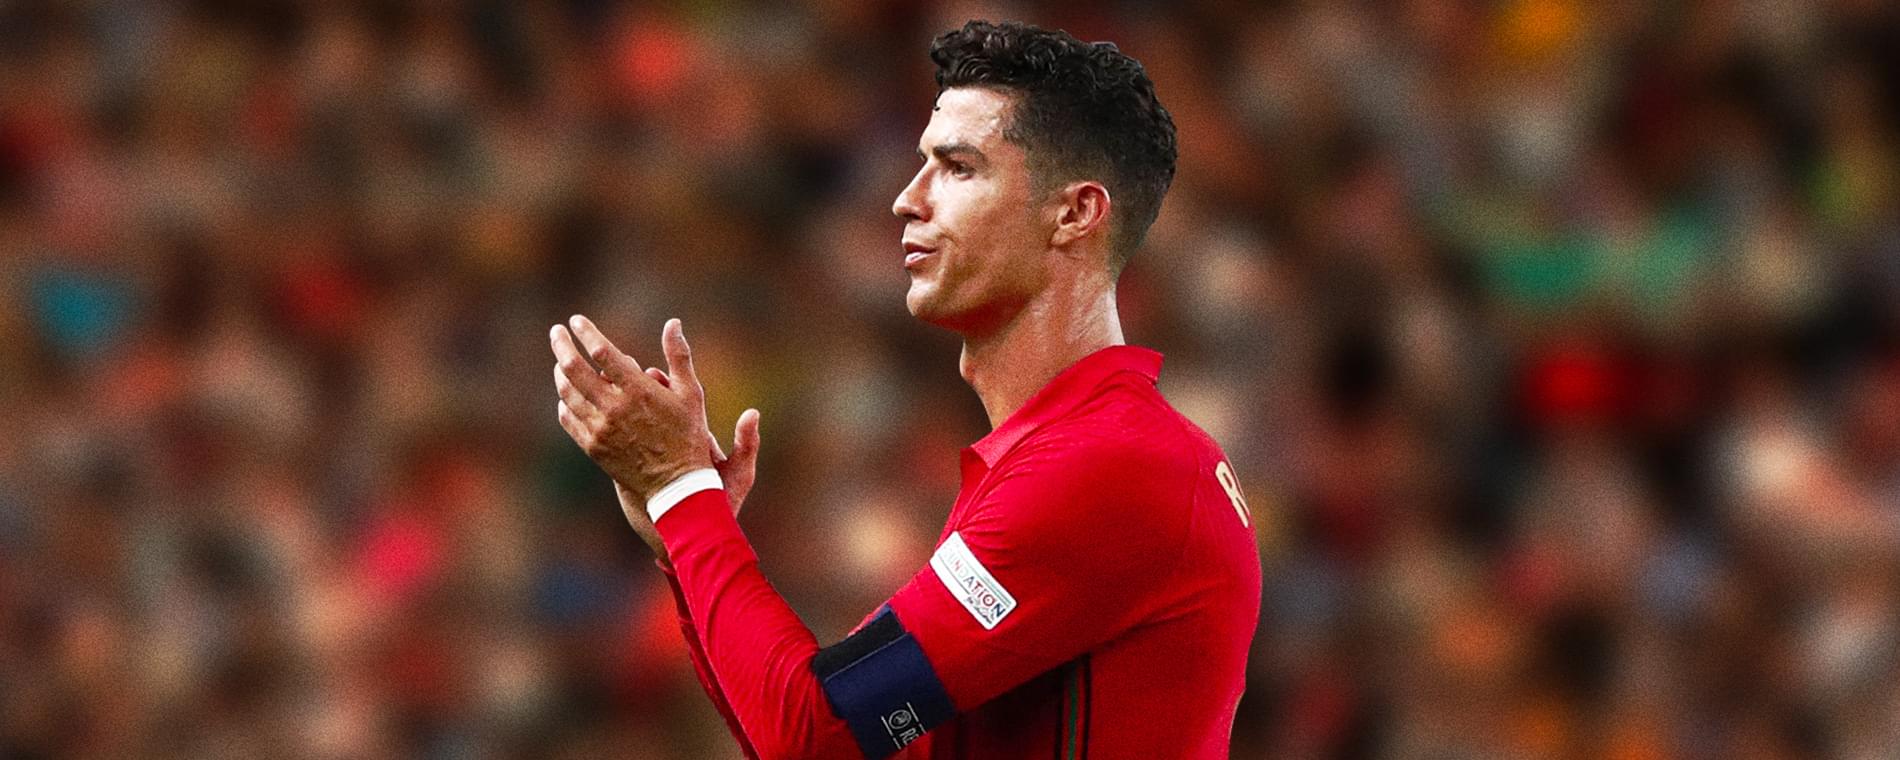 Binance partners with Cristiano Ronaldo for NFTs